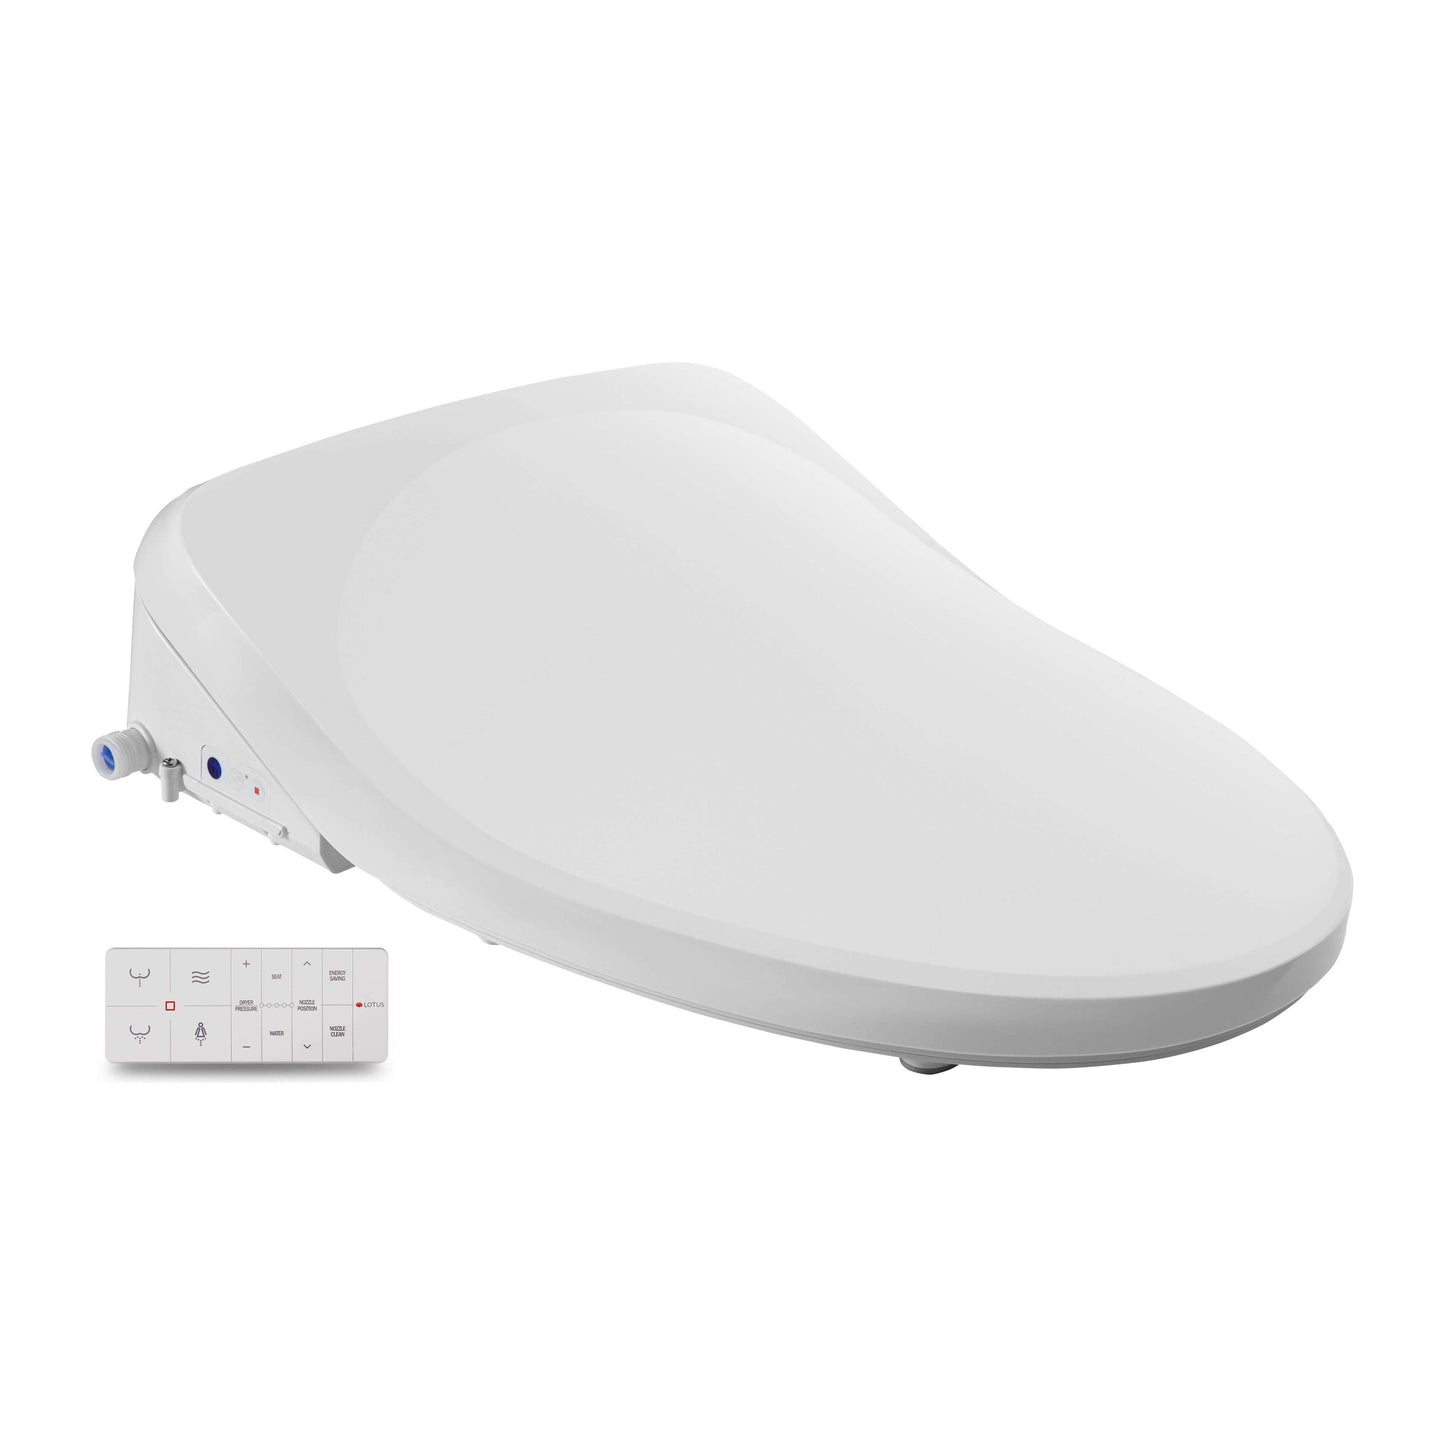 Lotus Bidet Seat ATS-850R - side angled view with remote control